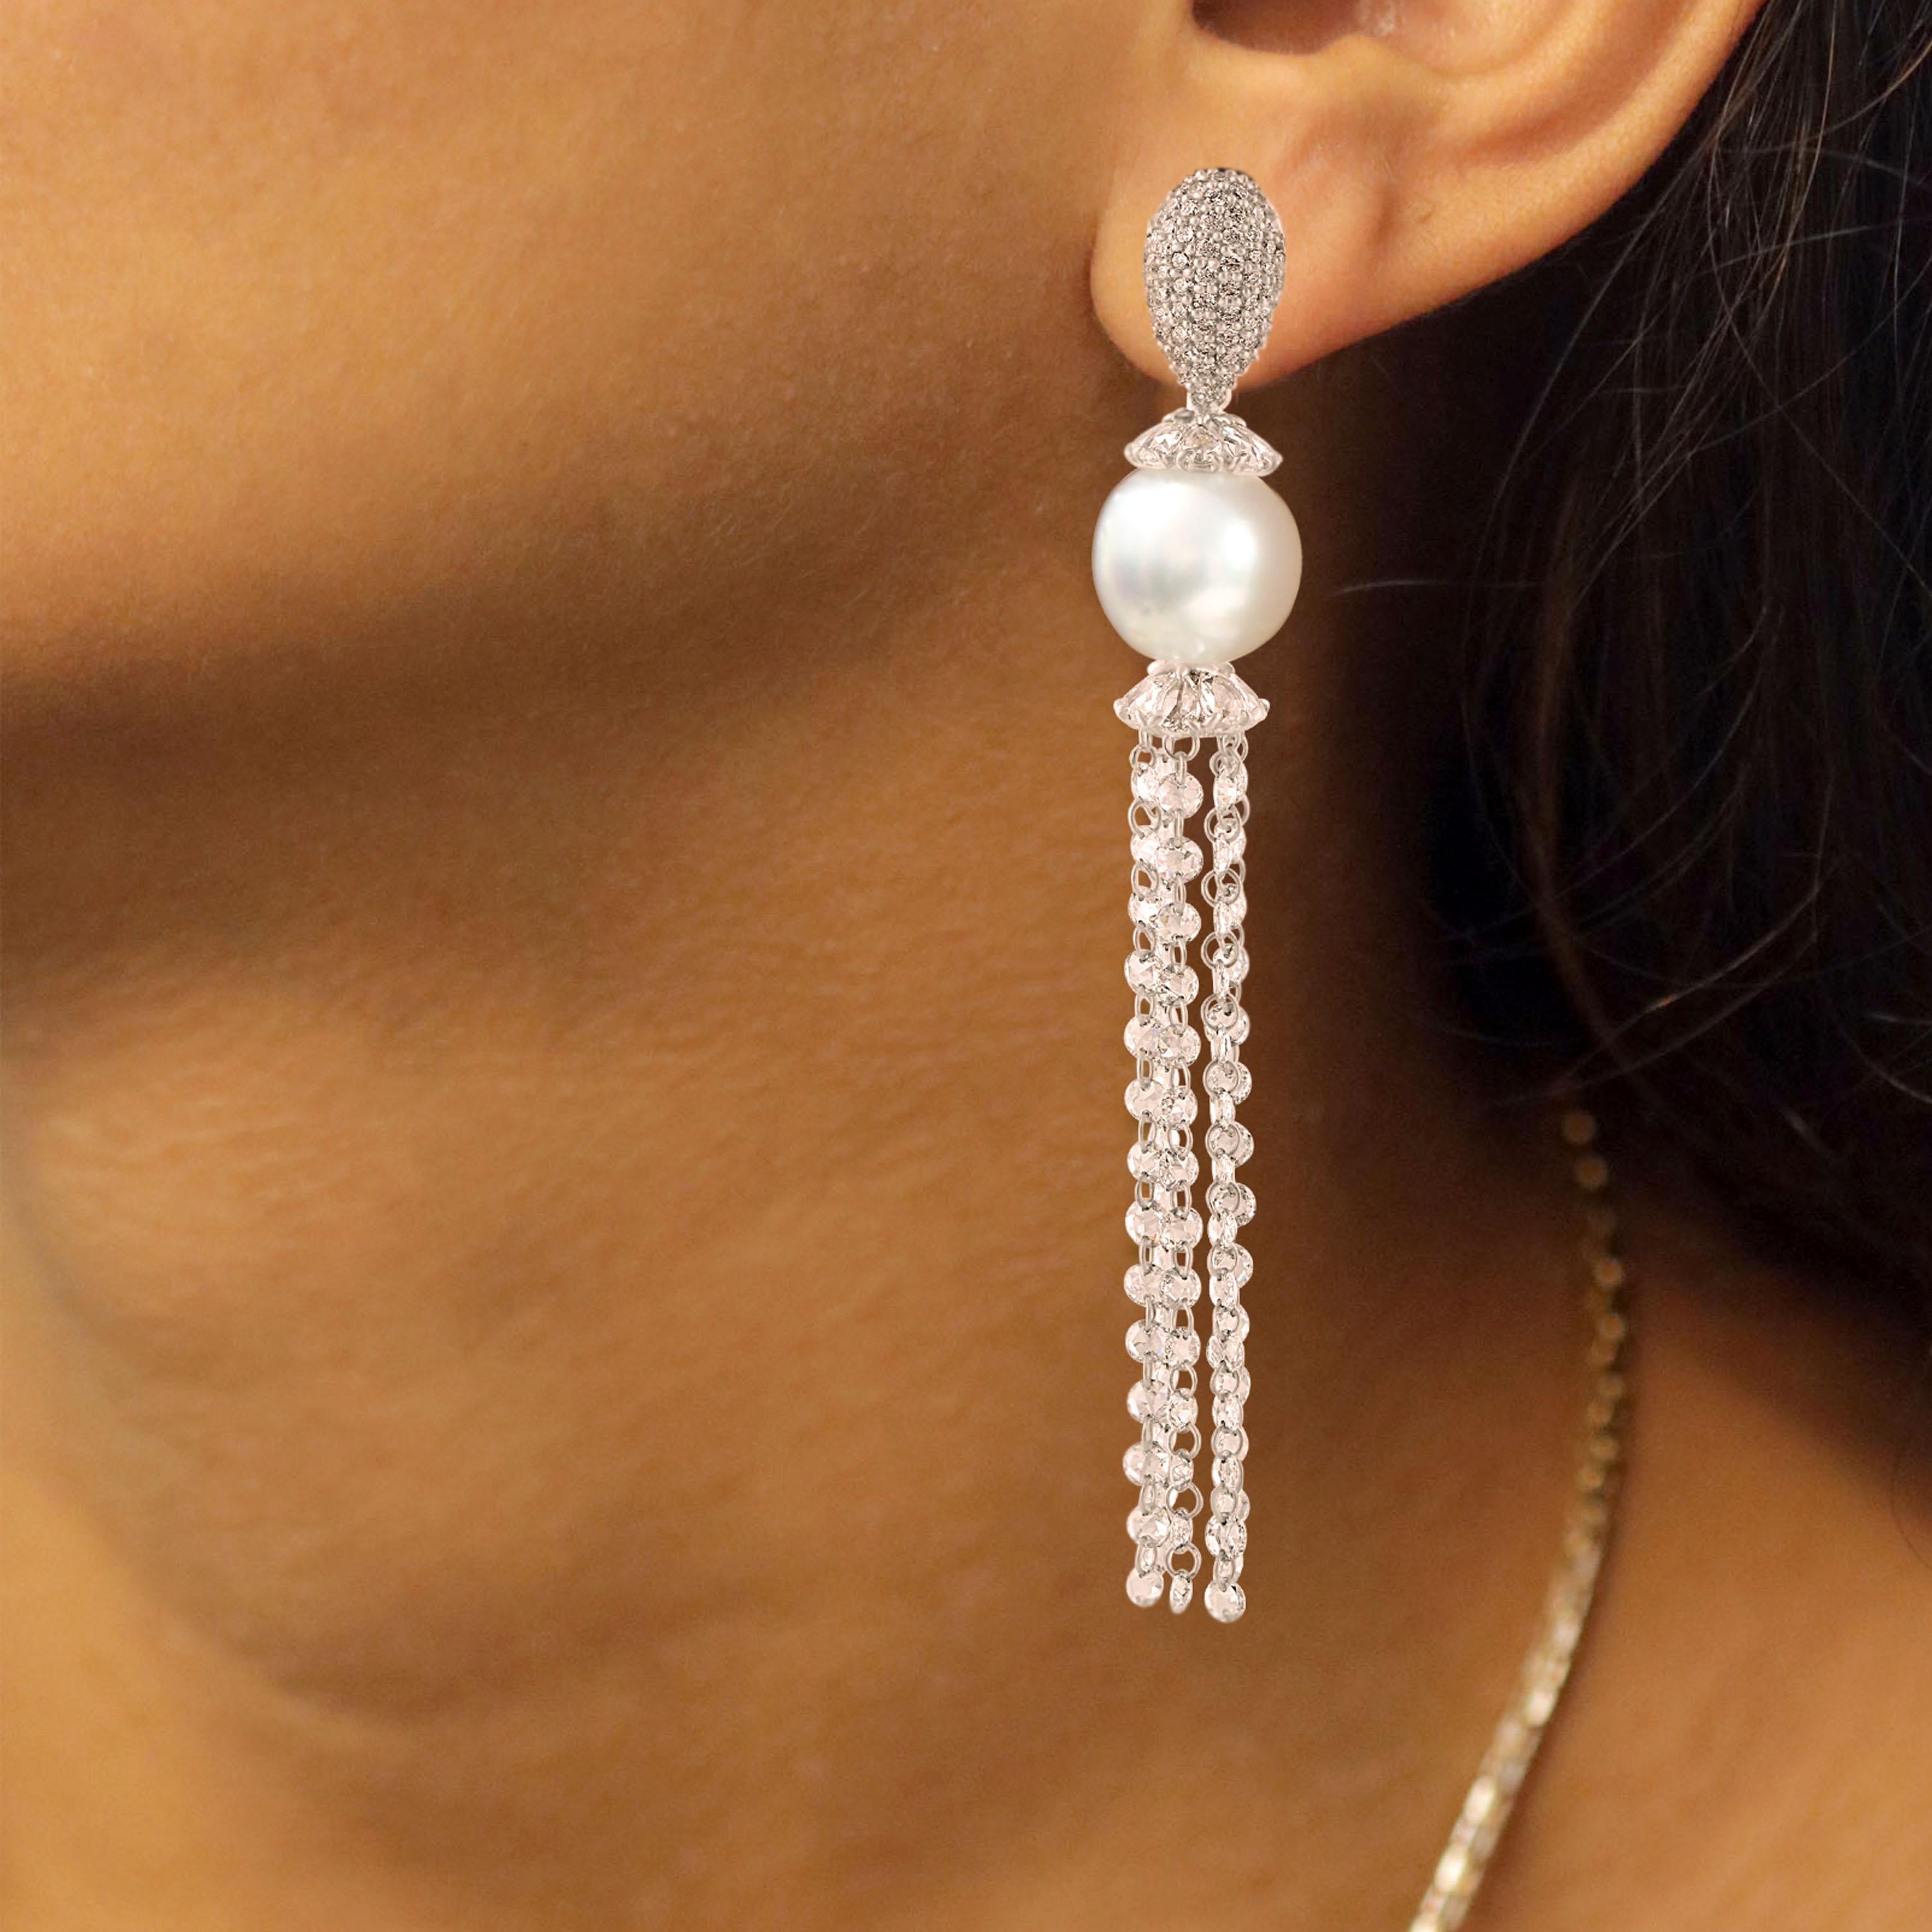 Gross Weight: 9.82 Grams
Diamond Weight: 4.85 cts
South Sea Pearls Weight: 14.78 cts
IGI Certification can be done on request.

Video of the product can be shared on request.

Investing in this heirloom-worthy 18K white gold pair of earrings with